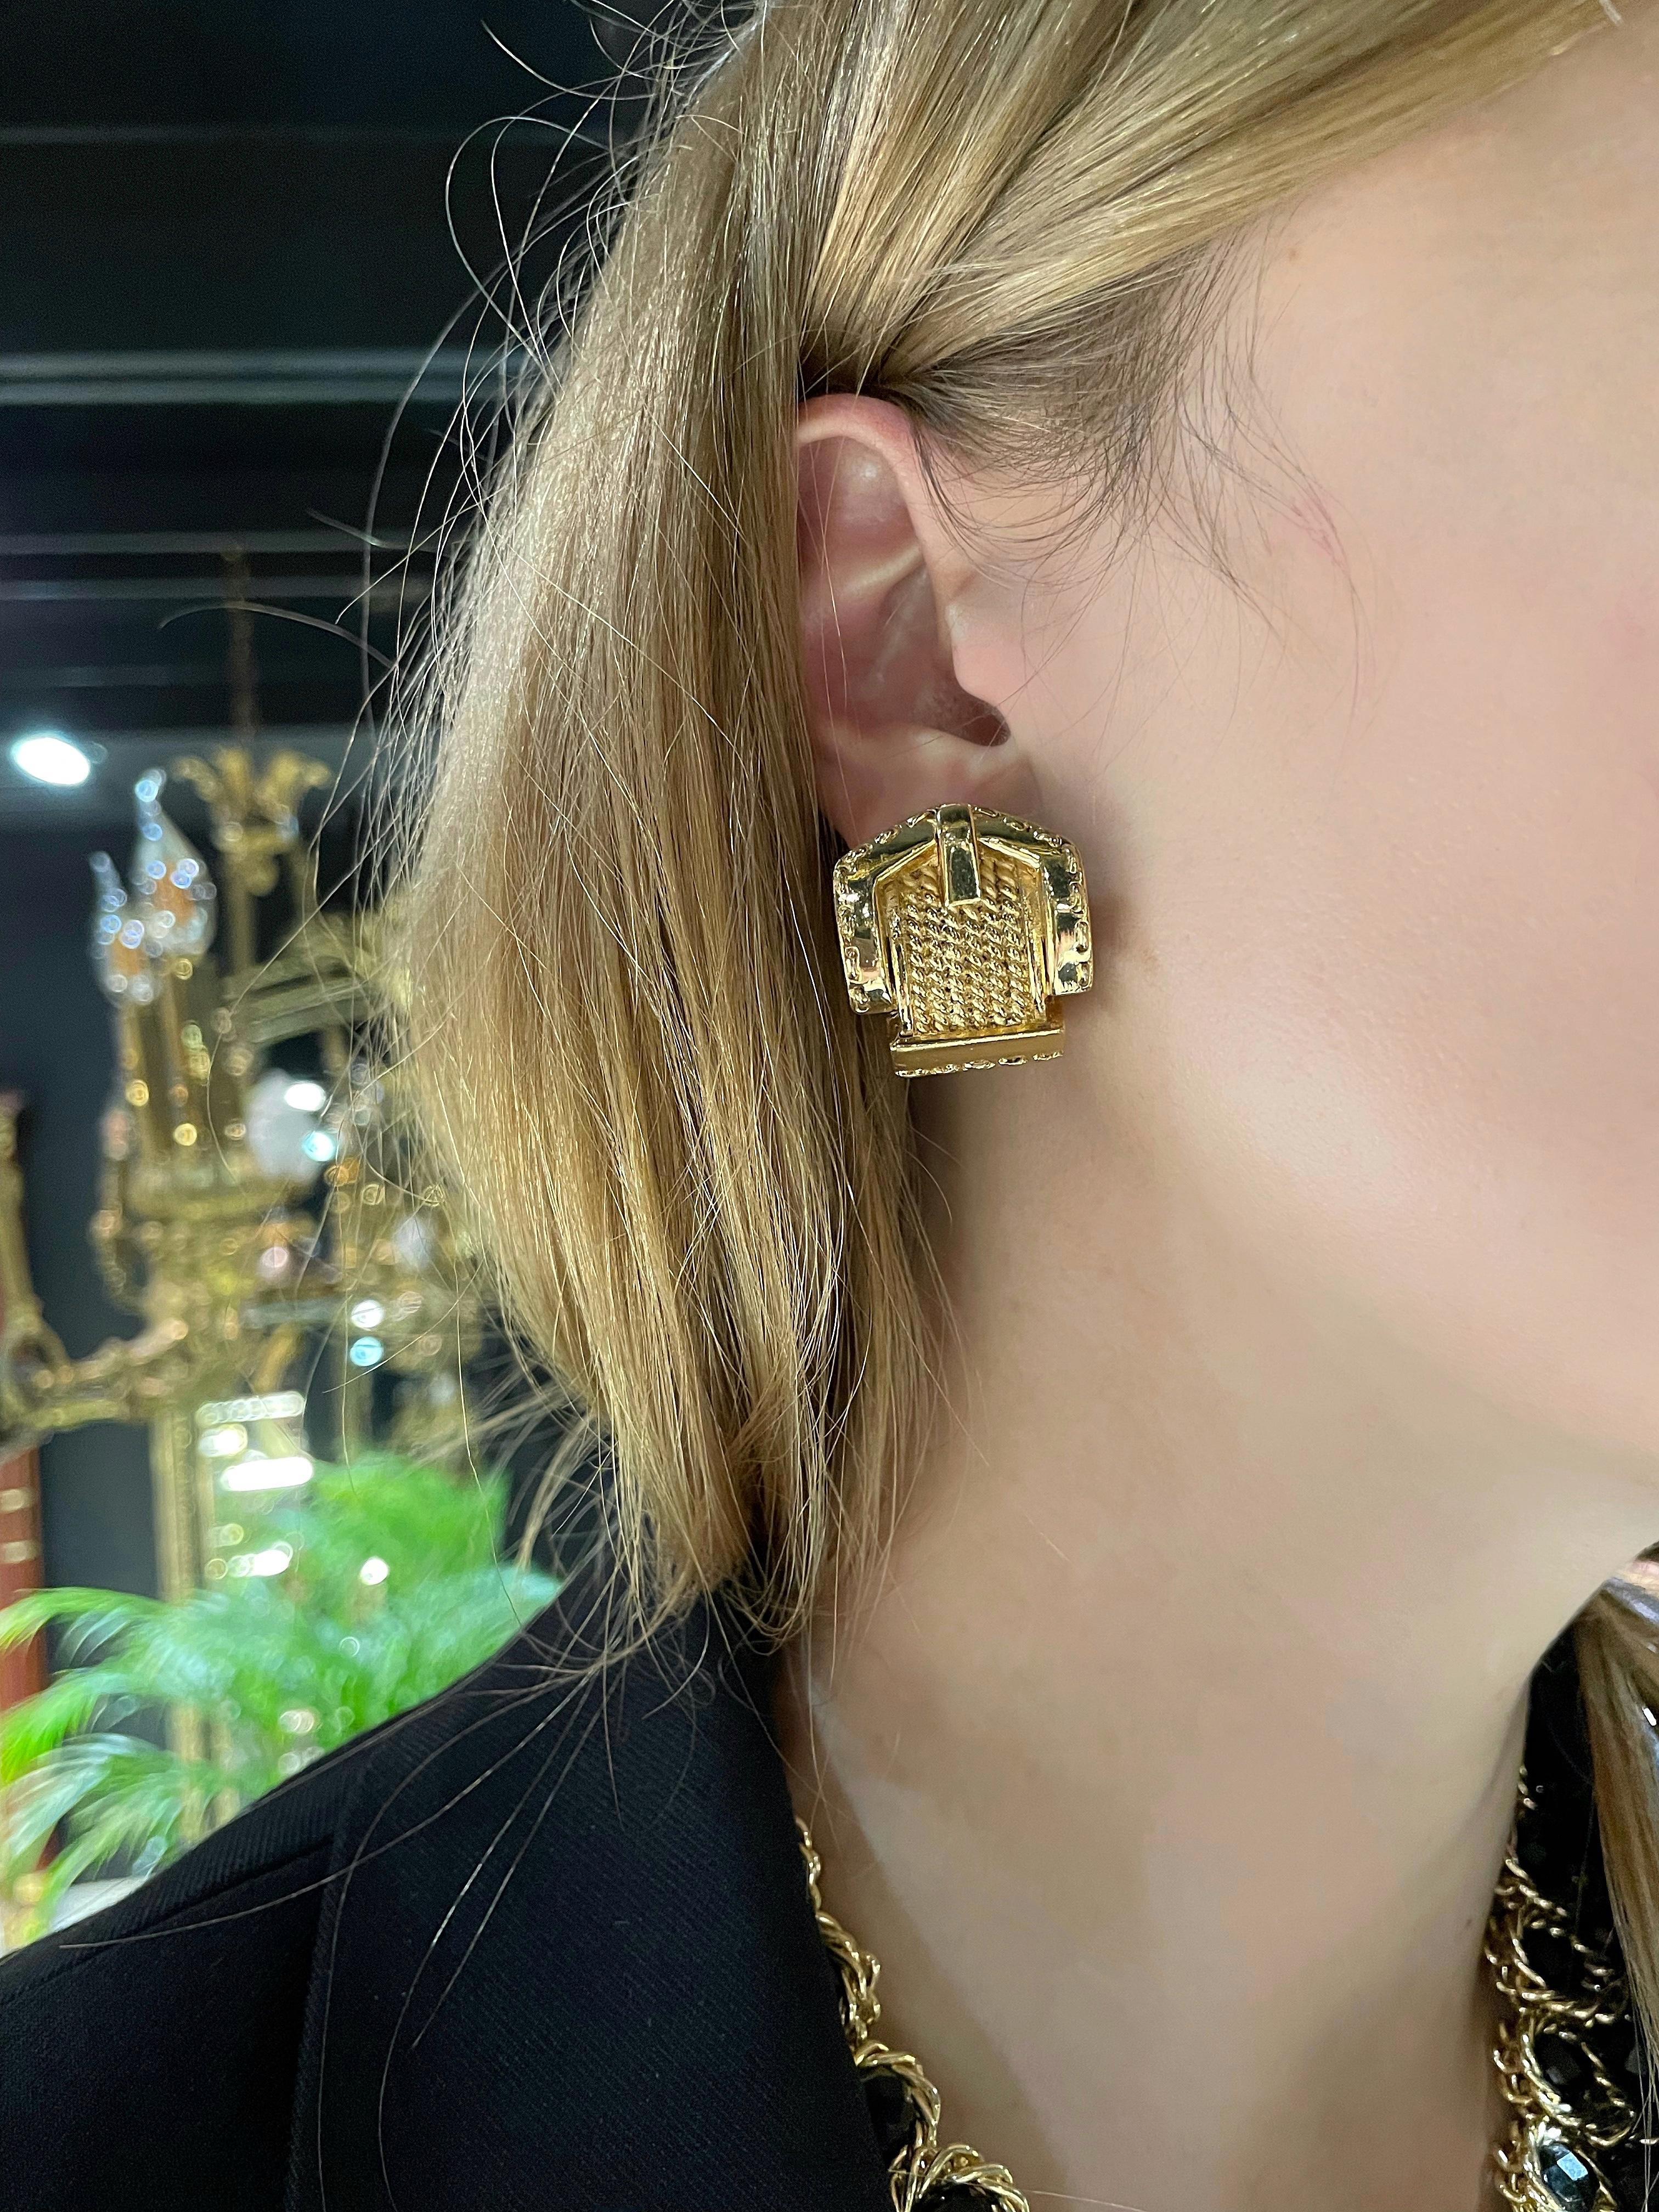 This is a buckle design massive vintage clip on earrings designed by Guy Laroche in 1980’s. This piece is gold plated. 

Markings: “Guy Laroche - Paris©” (shown in photo).

One edge is a bit rubbed off (shown in photo)

Length: 2.7cm
Width: